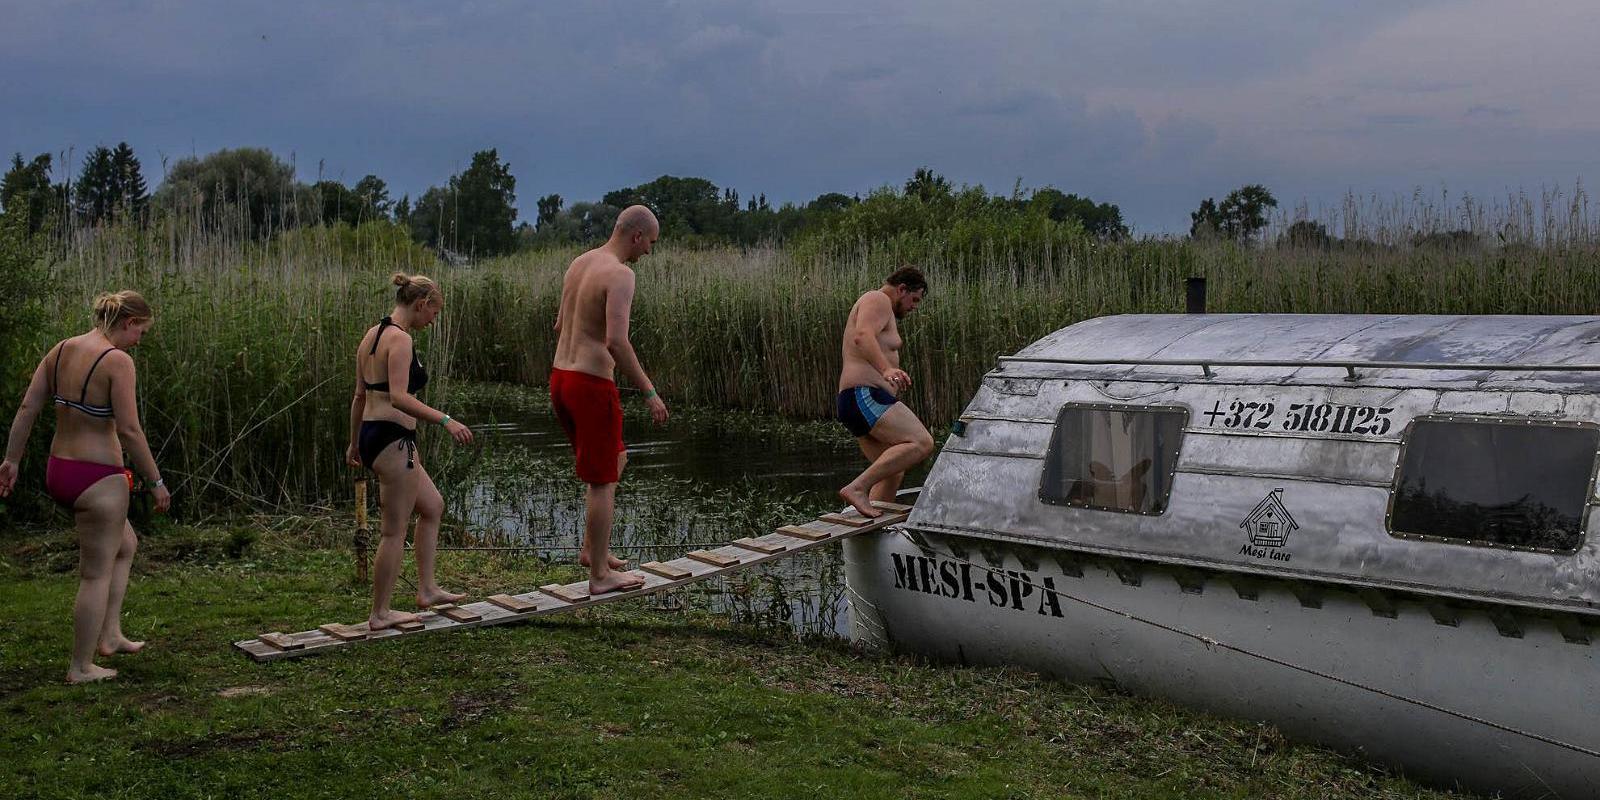 Accommodation in a sauna boat on Lake Peipus, guests heading to the sauna